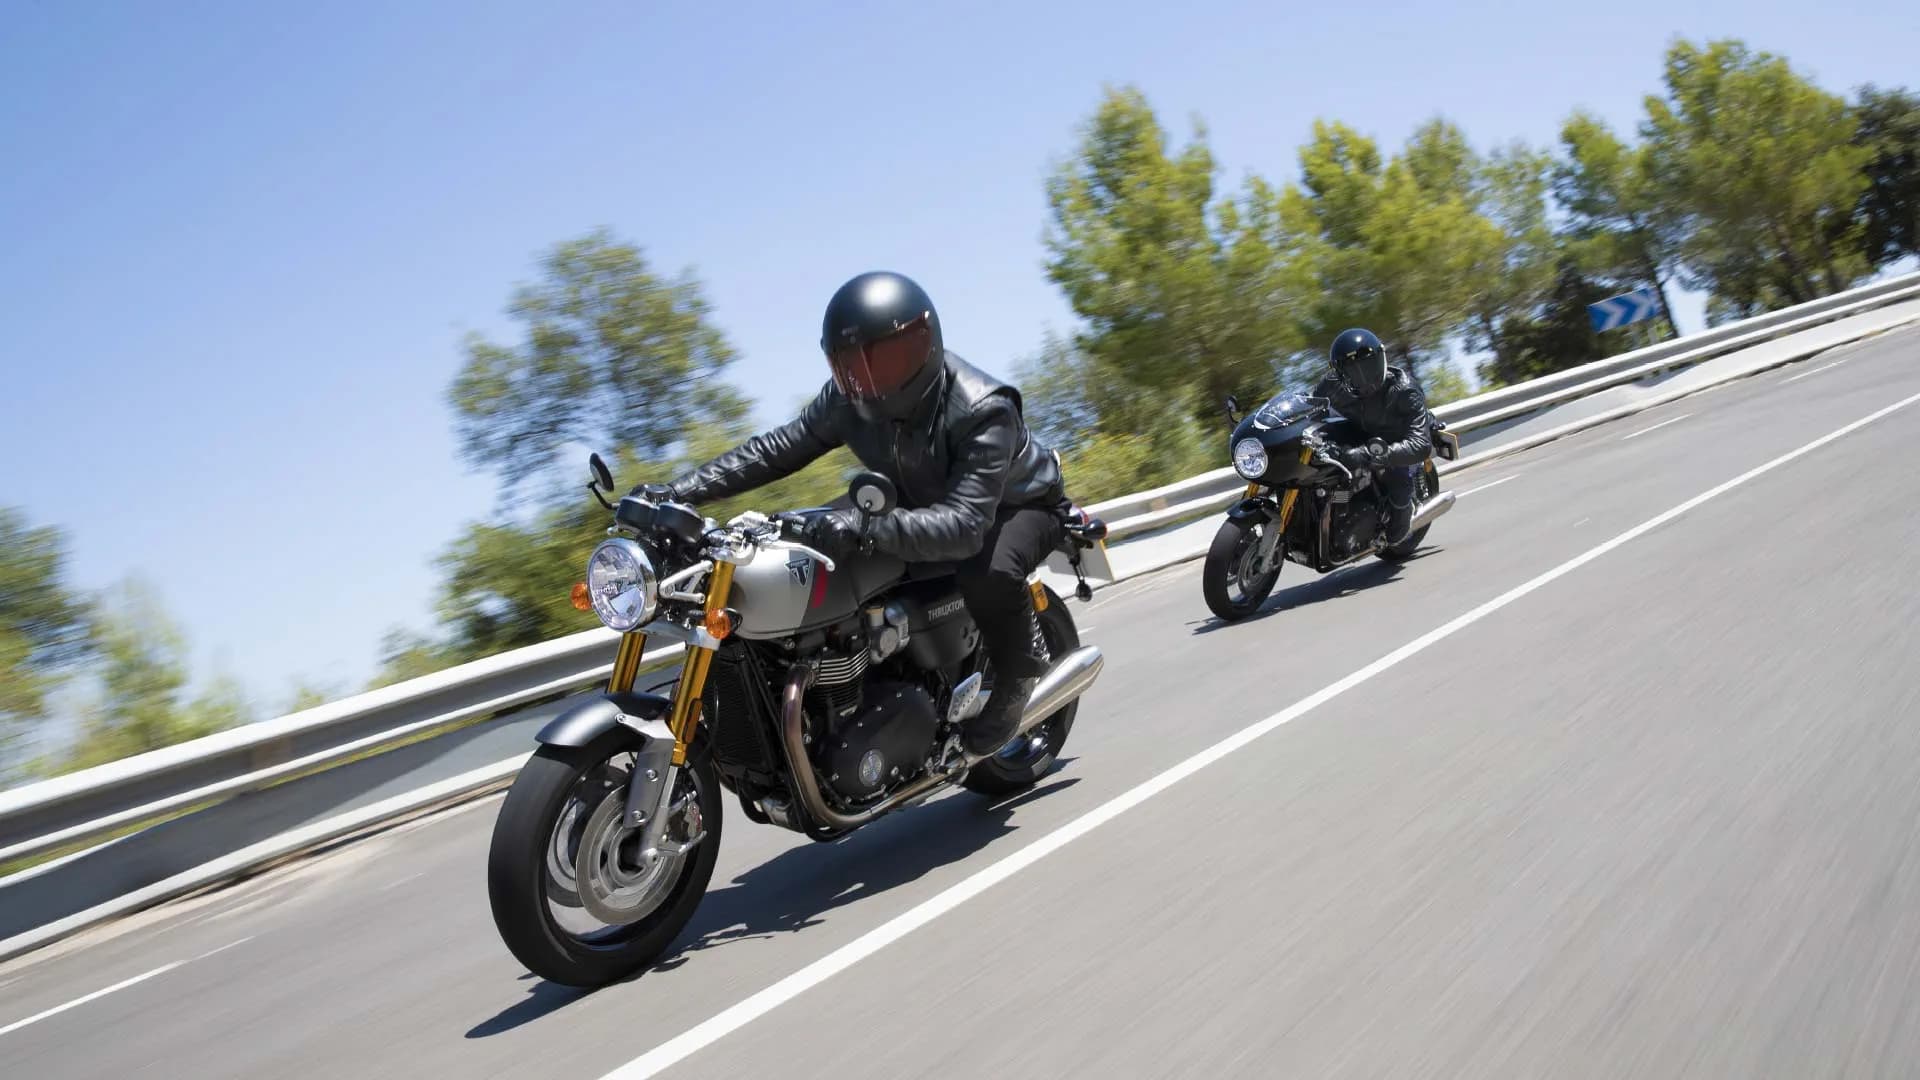  Action shot of Triumph Thruxton RS motorcycles riding down a road together